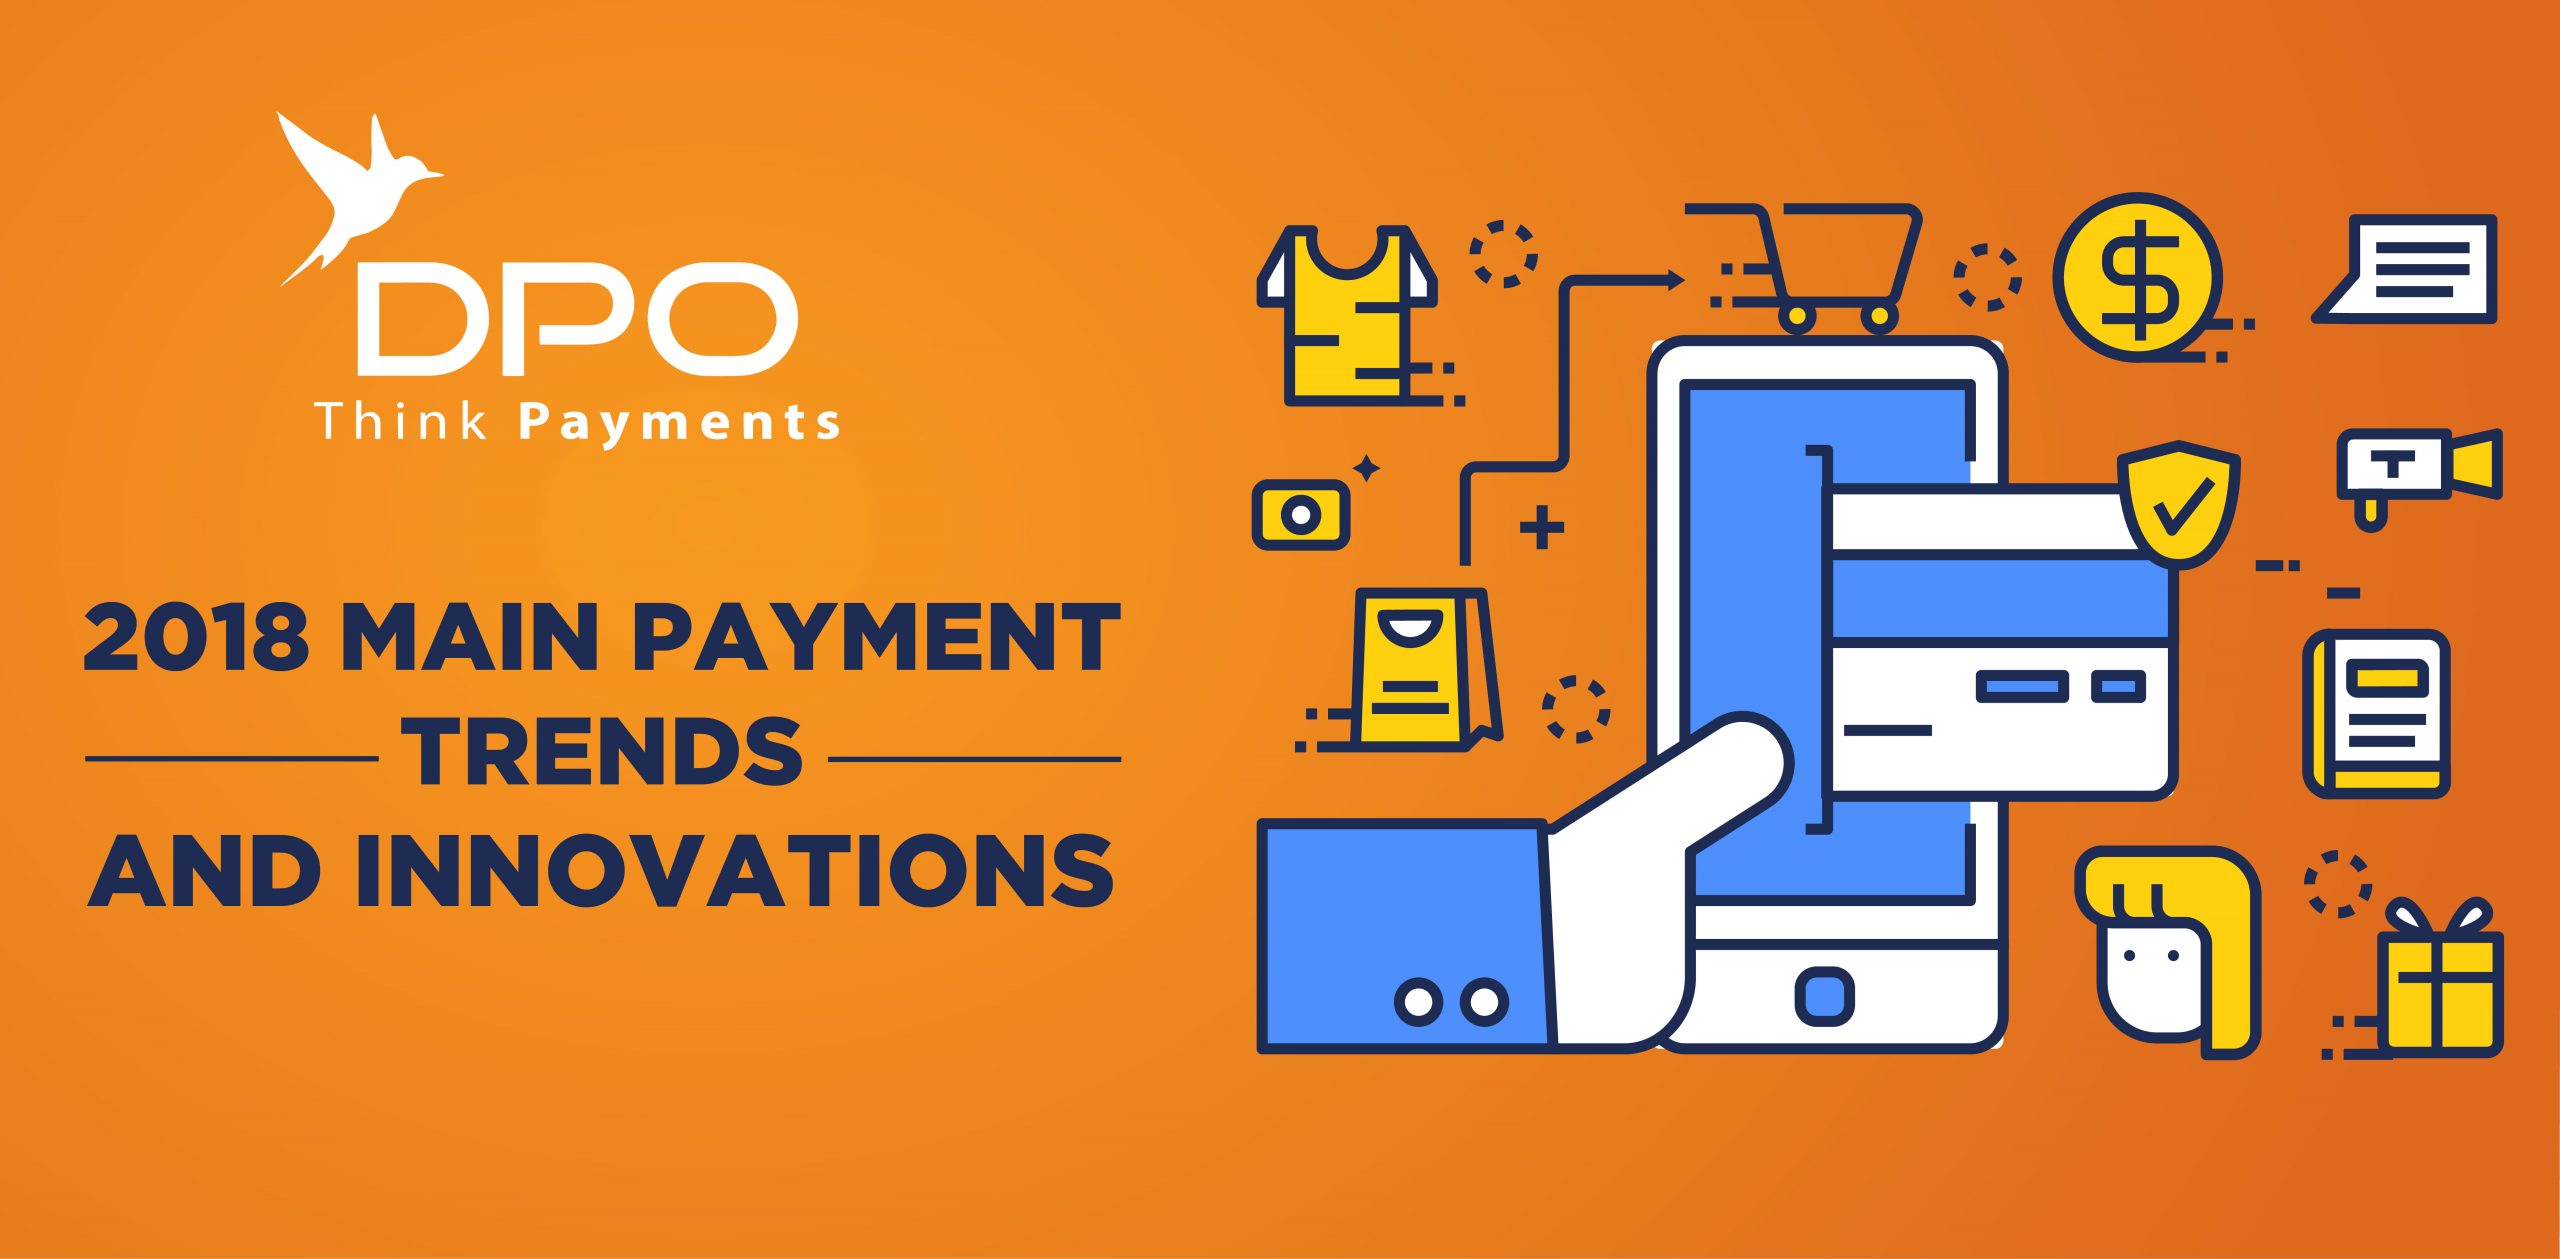 2018’s Main Payment Trends and Innovations.